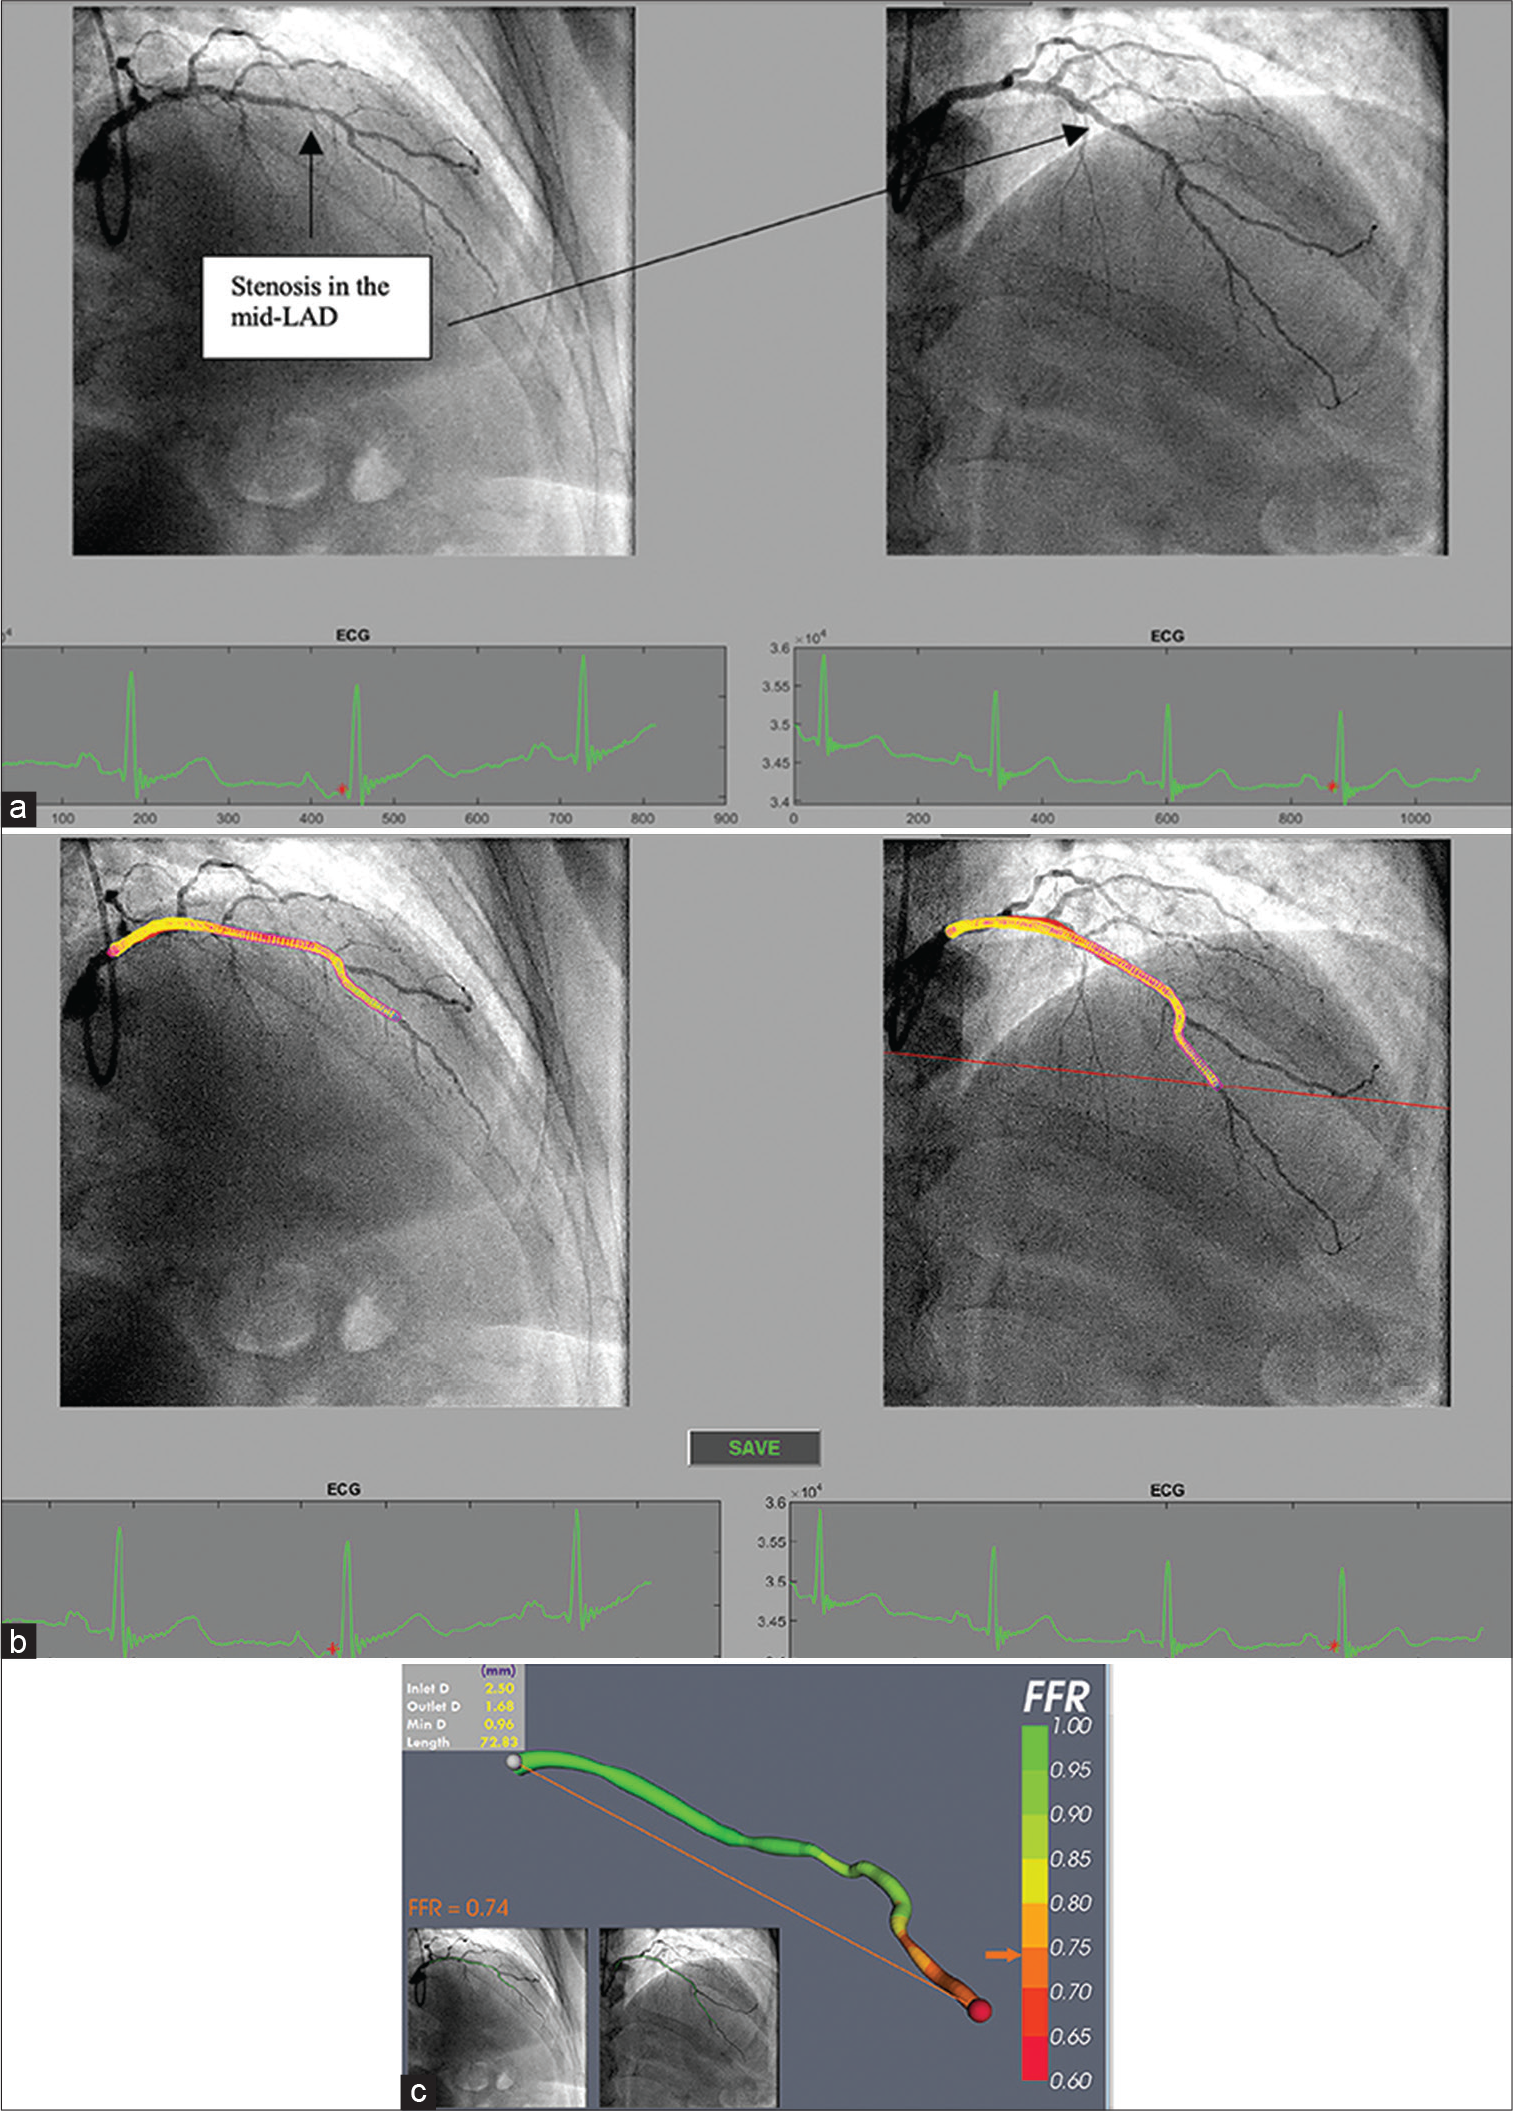 (a) Processing selected angiogram images. Two views (at least 30° apart) of the LAD are chosen at end diastole (red dot on ECG tracing) from a patient with NSTE-ACS. (b) The LAD artery is now segmented and ready for a 3D reconstruction before computational fluid dynamics (CFD) simulation. (c) Virtual (COMPUTED) fractional flow reserve (vFFR) result after 3D reconstruction and CFD simulation showing a vFFR in the LAD of 0.74 (Courtesy of Hazel Arfah Haley et al.).